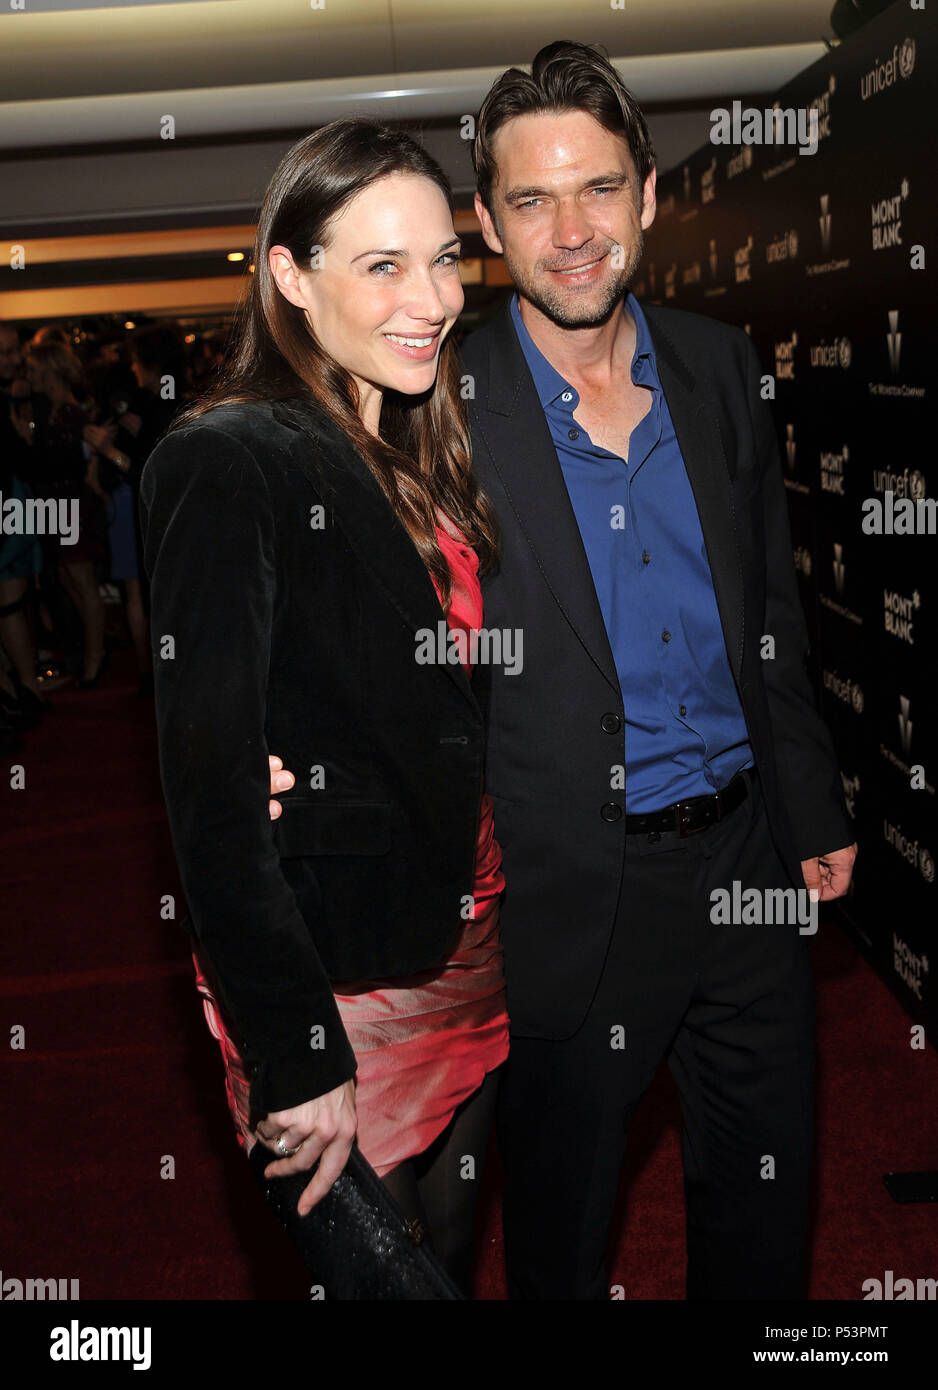 01  Claire Forlani   Dougray Scott  01   - Montblanc's Charity Cocktail at the Soho House In Los Angeles.01  Claire Forlani   Dougray Scott  01  Event in Hollywood Life - California, Red Carpet Event, USA, Film Industry, Celebrities, Photography, Bestof, Arts Culture and Entertainment, Celebrities fashion, Best of, Hollywood Life, Event in Hollywood Life - California, Red Carpet and backstage, Music celebrities, Topix, Couple, family ( husband and wife ) and kids- Children, brothers and sisters inquiry tsuni@Gamma-USA.com, Credit Tsuni / USA, 2010 Stock Photo